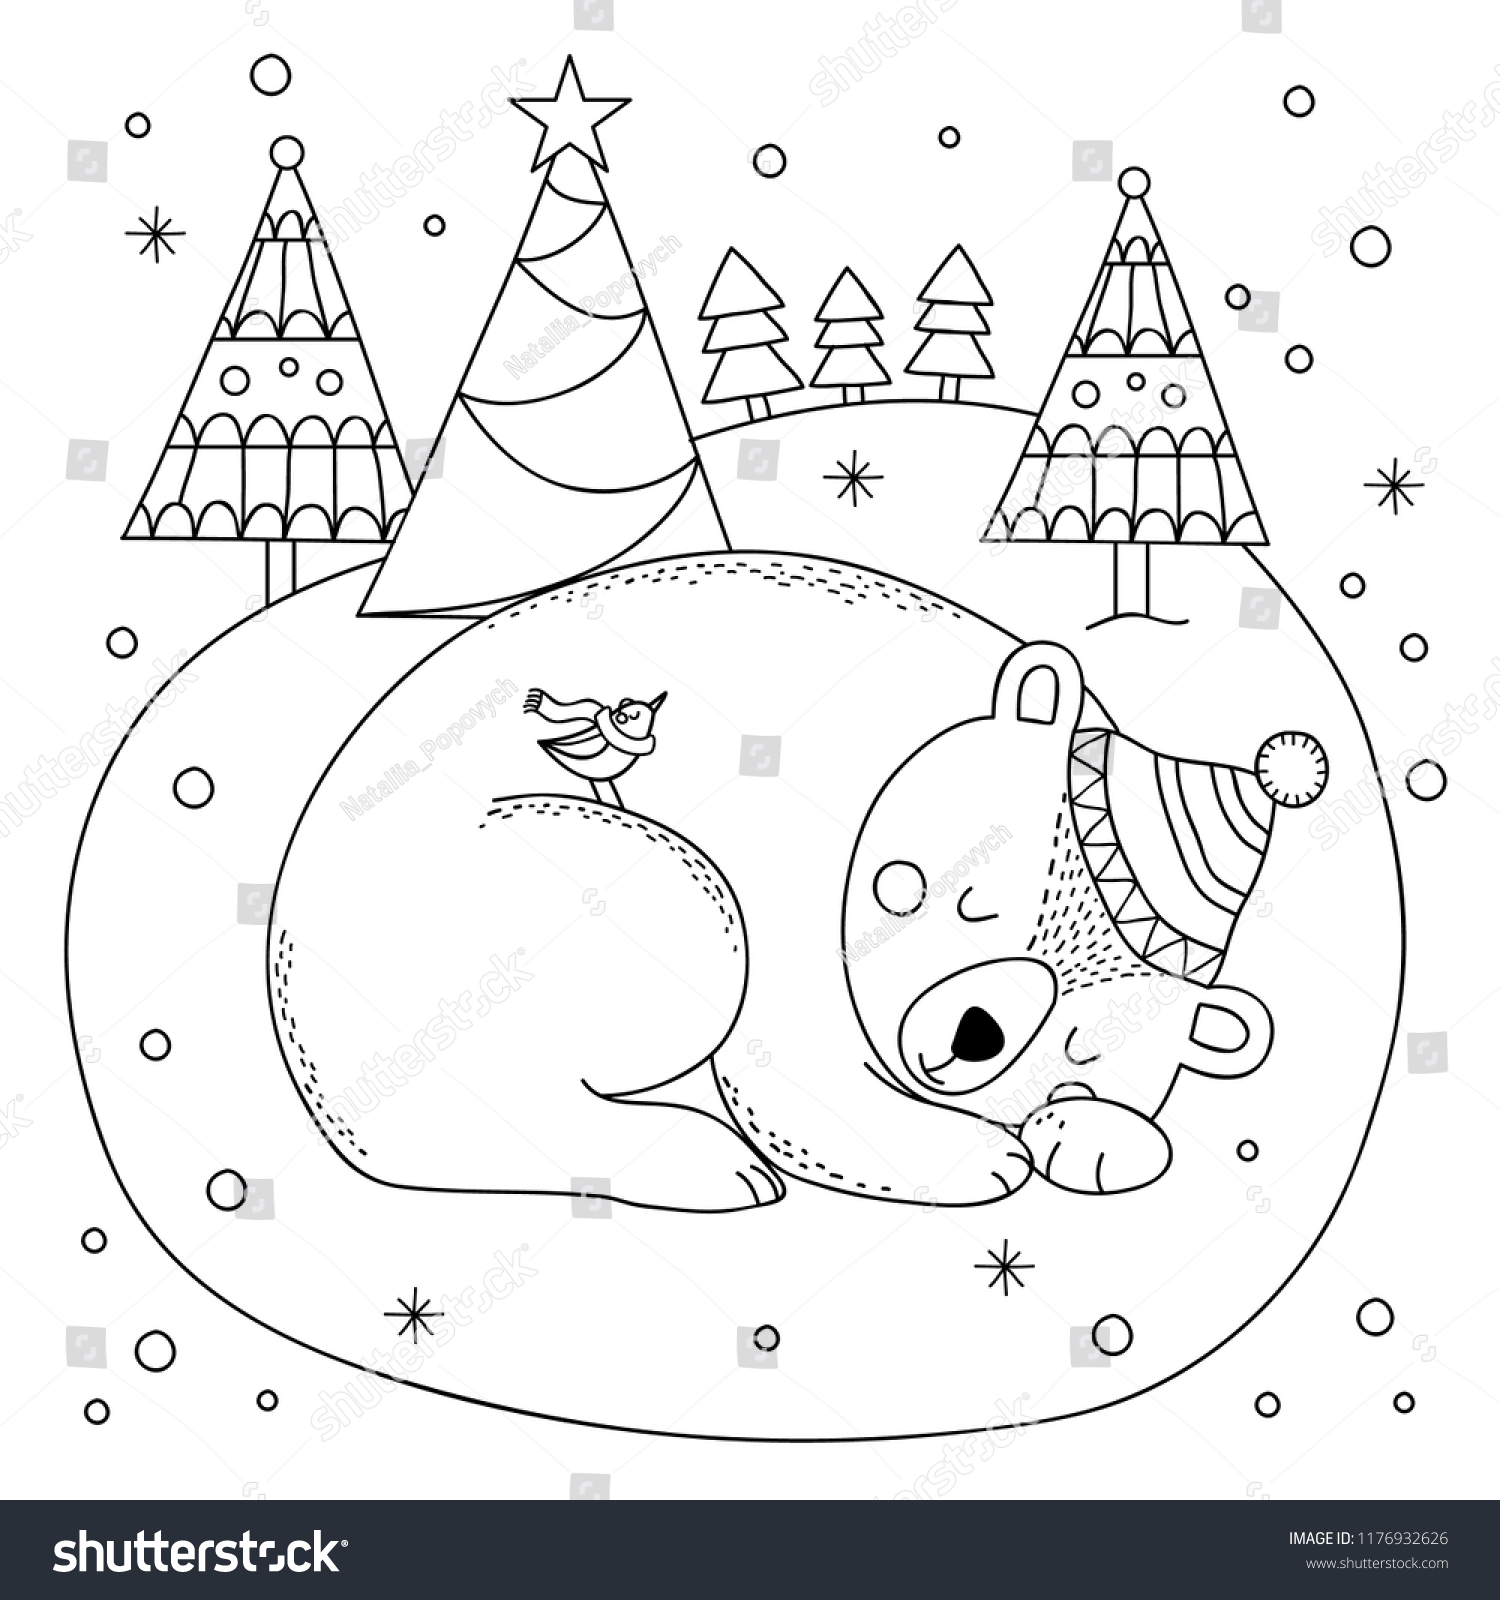 Coloring page of cute polar bears. Hand drawn vector illustration of the polar bear. #1176932626